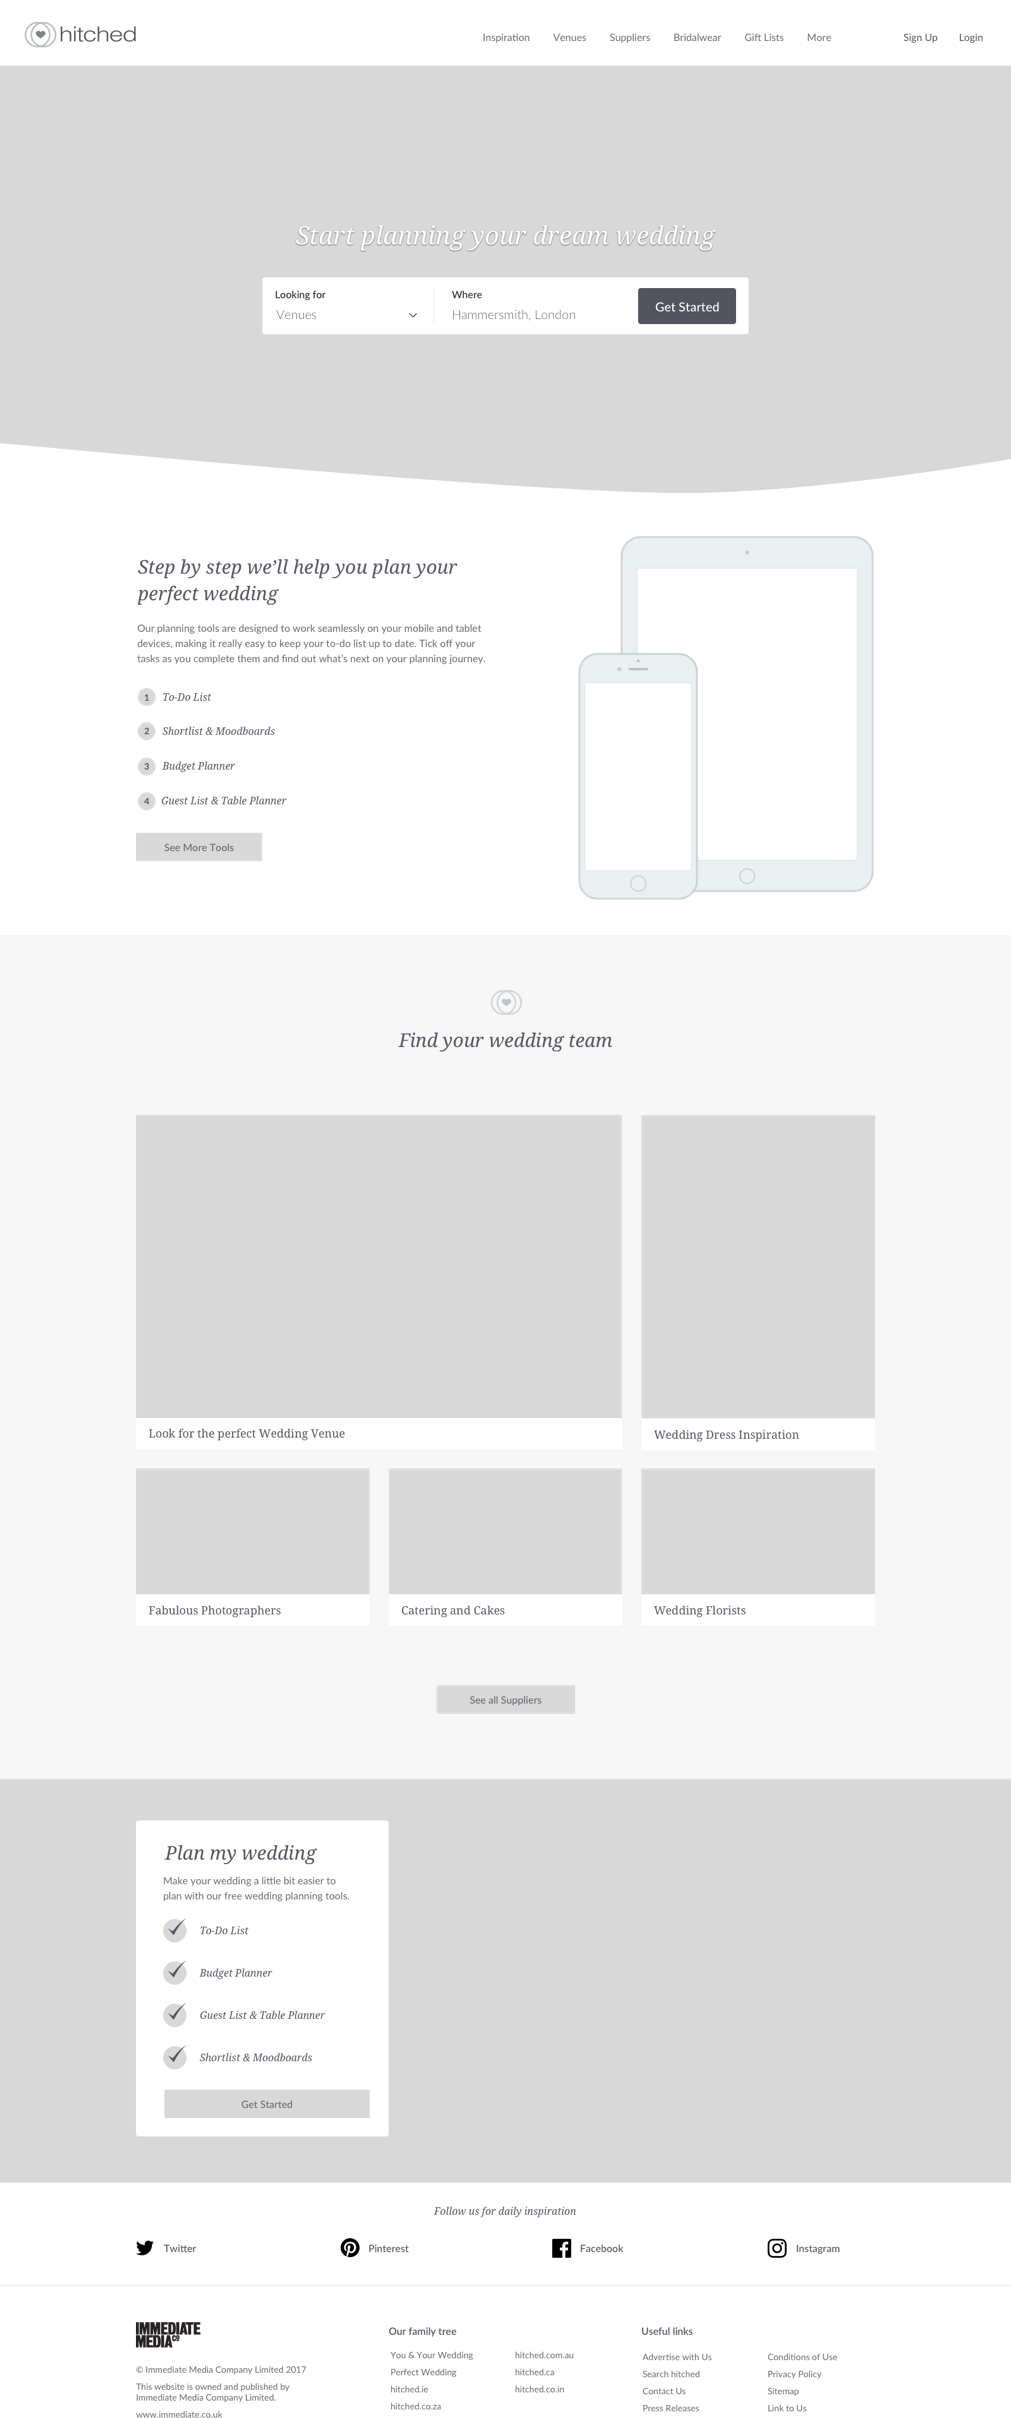 The finished hitched wireframe after ux interviews